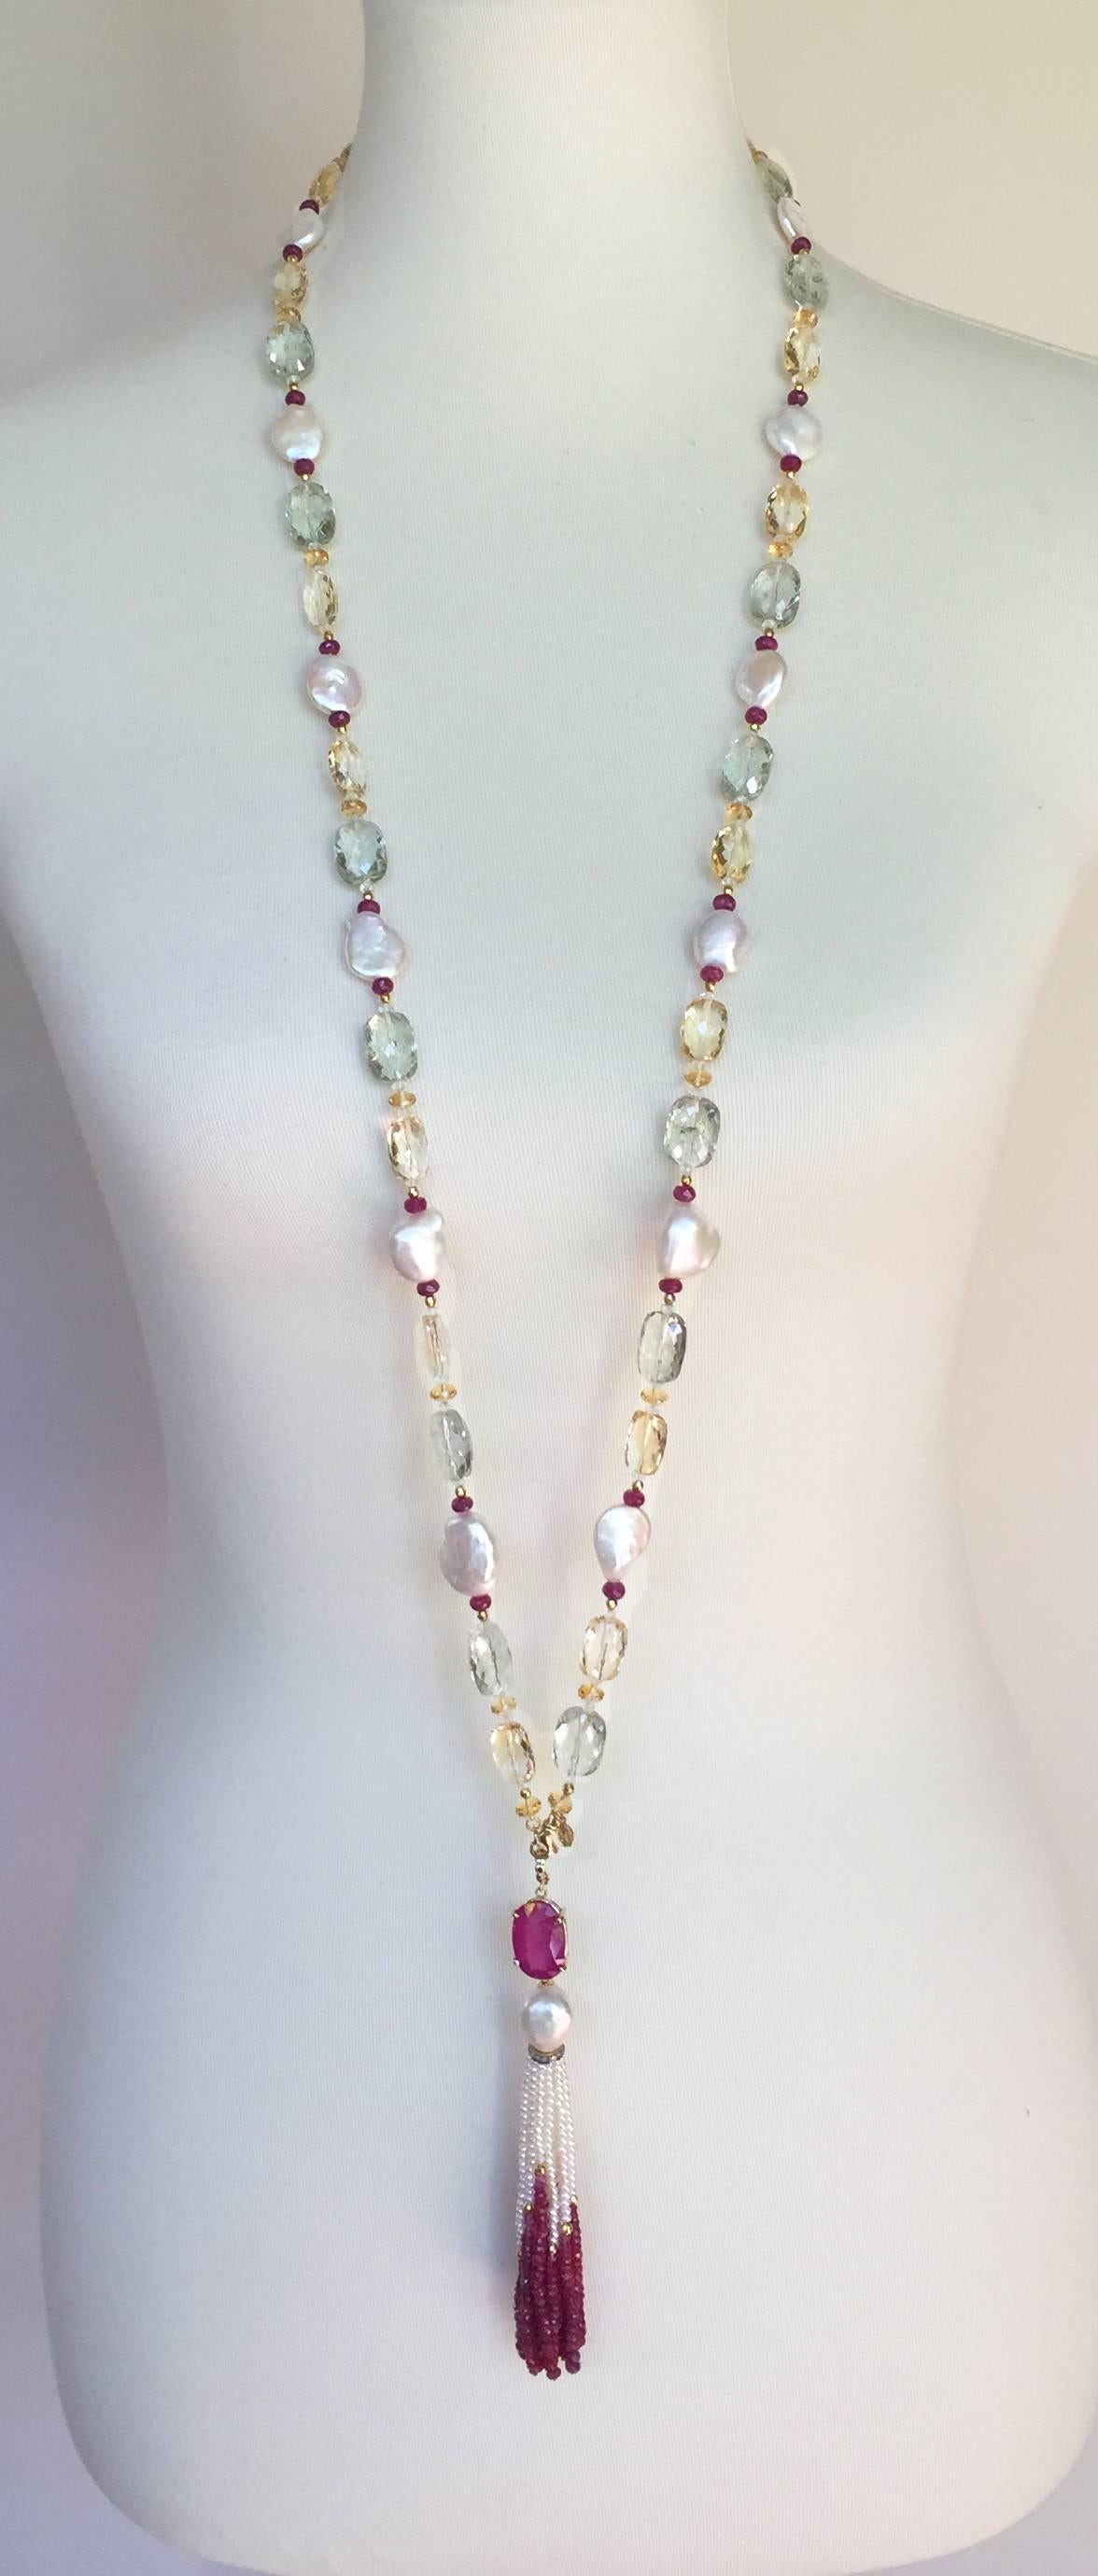 This vibrant sautoir is composed of pearl, citrine, and blue topaz beads accented by small ruby, aquamarine, citrine, 14k gold beads. The centerpiece of the sautoir is a tassel (5 inches)2800 with a large ruby and Baroque pearl with diamond